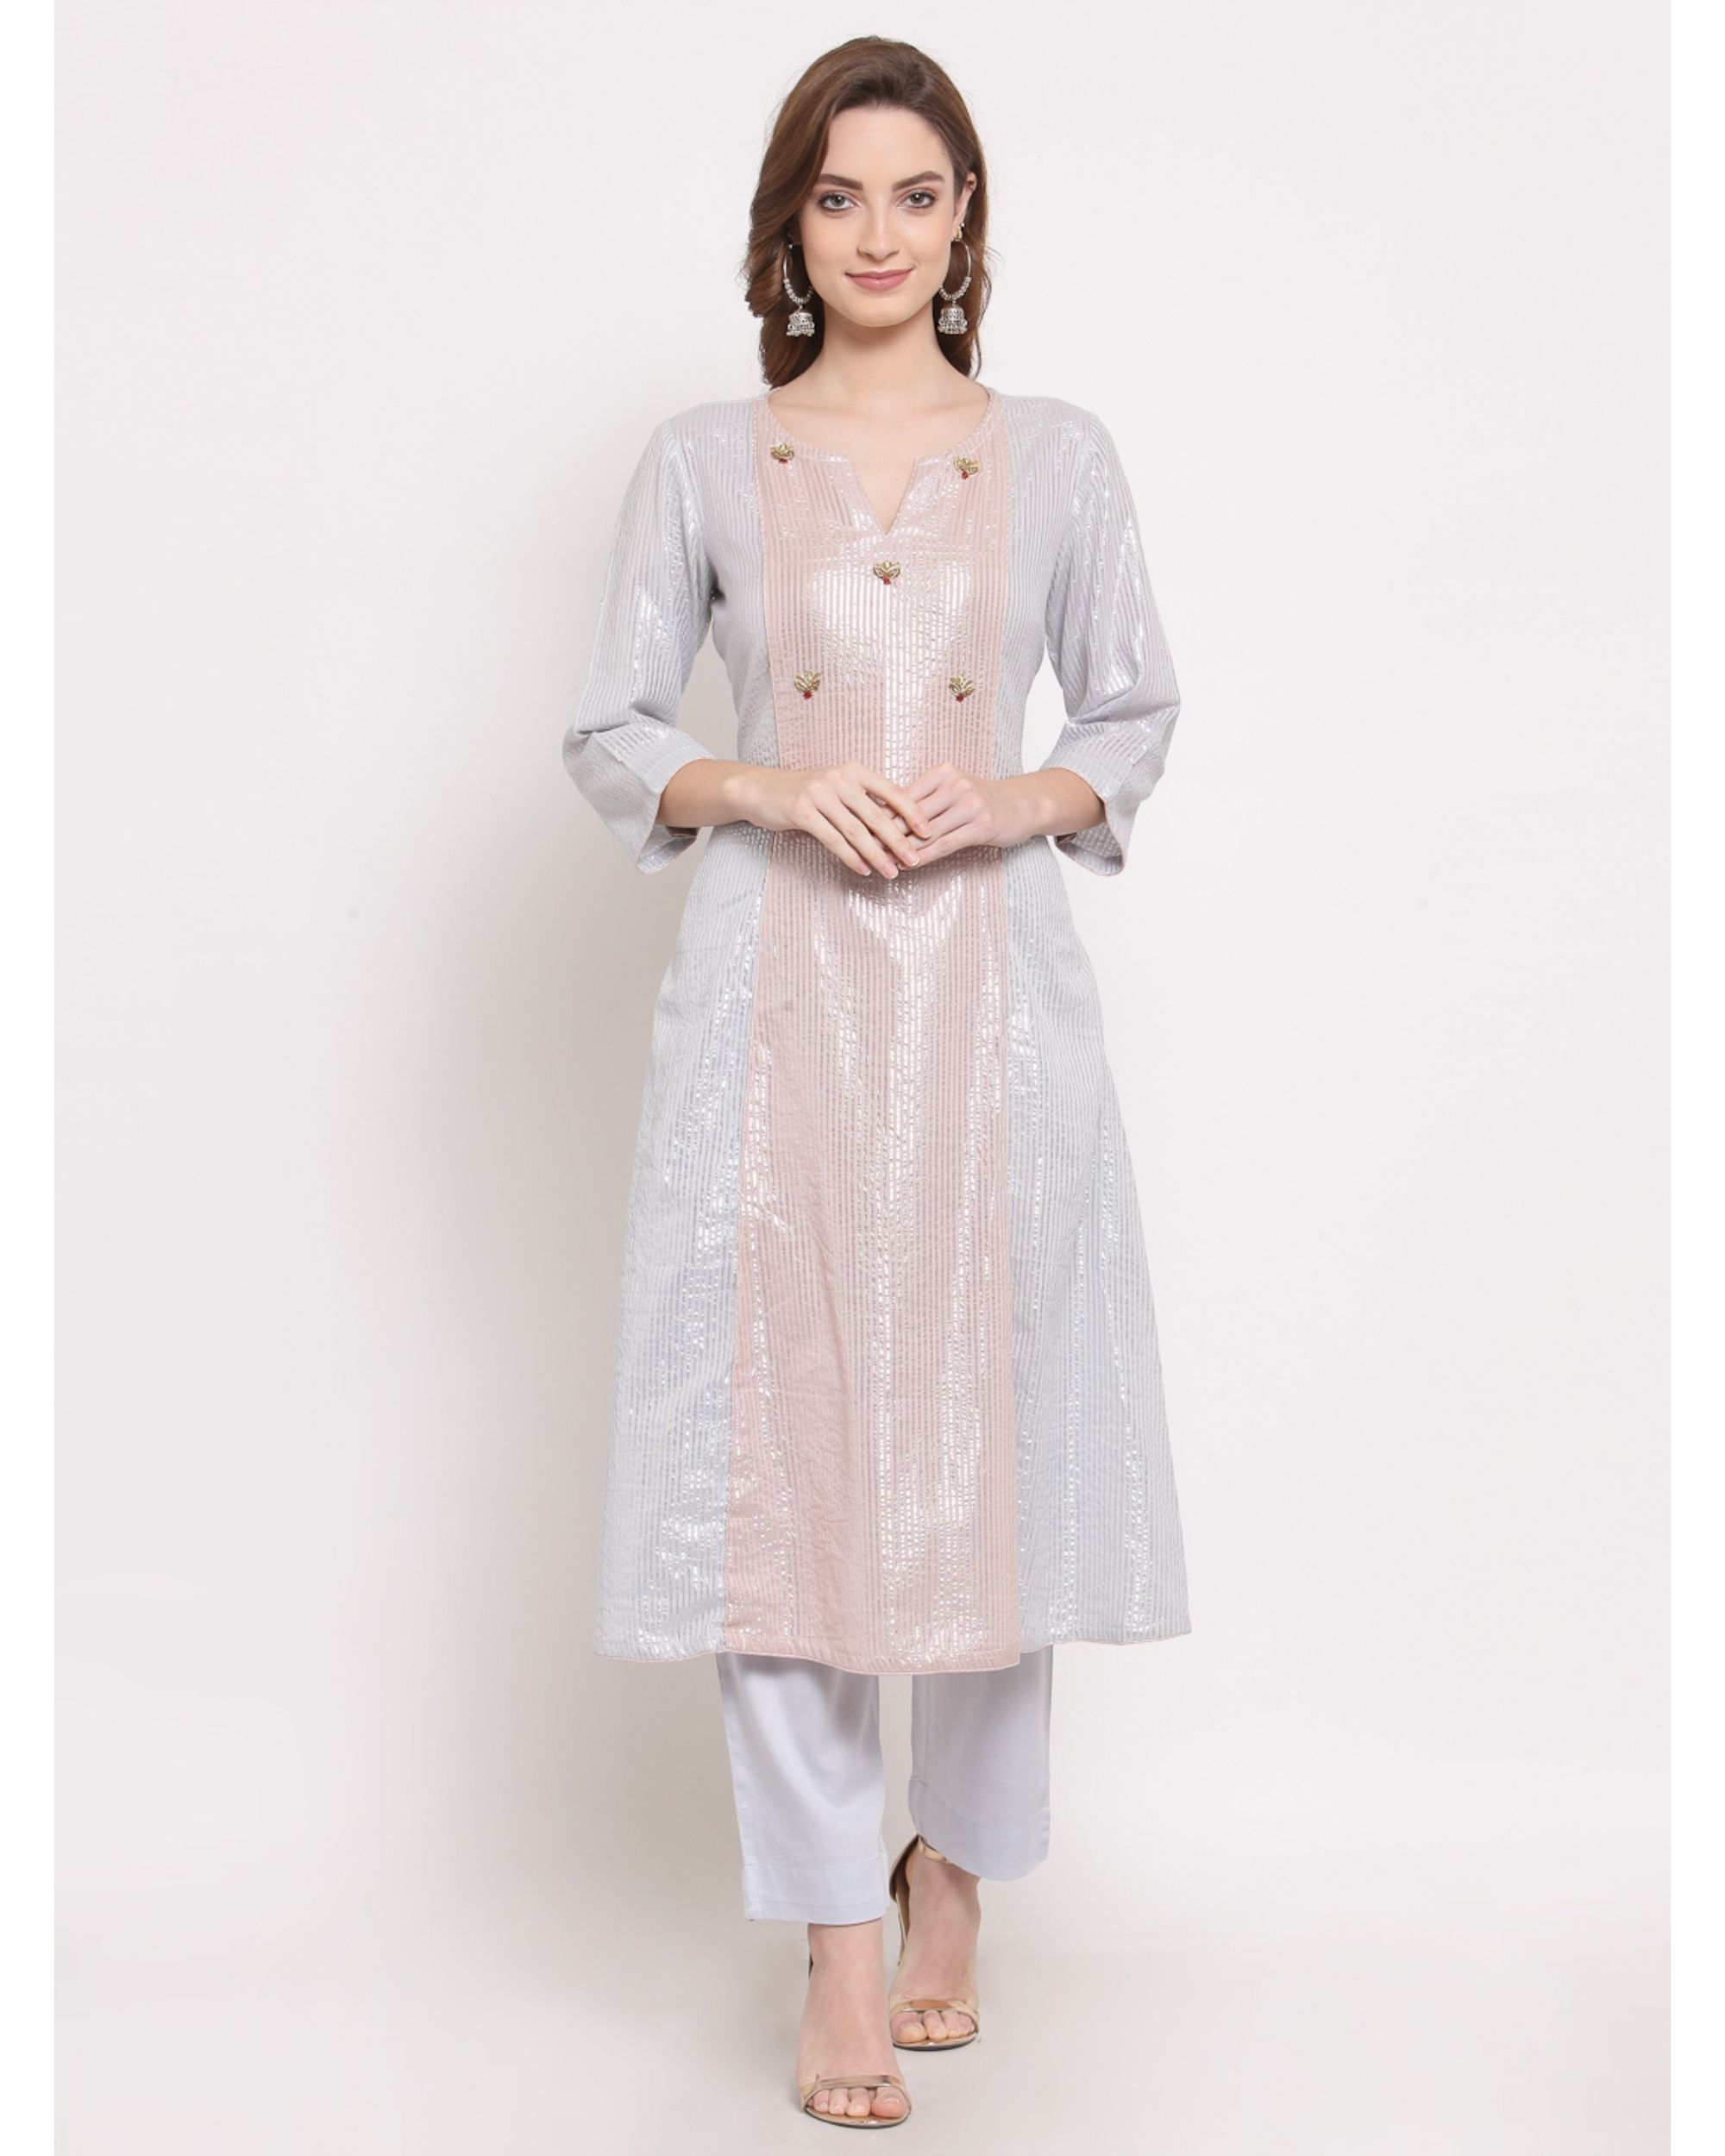 Light blue and pink striped embroidered kurta